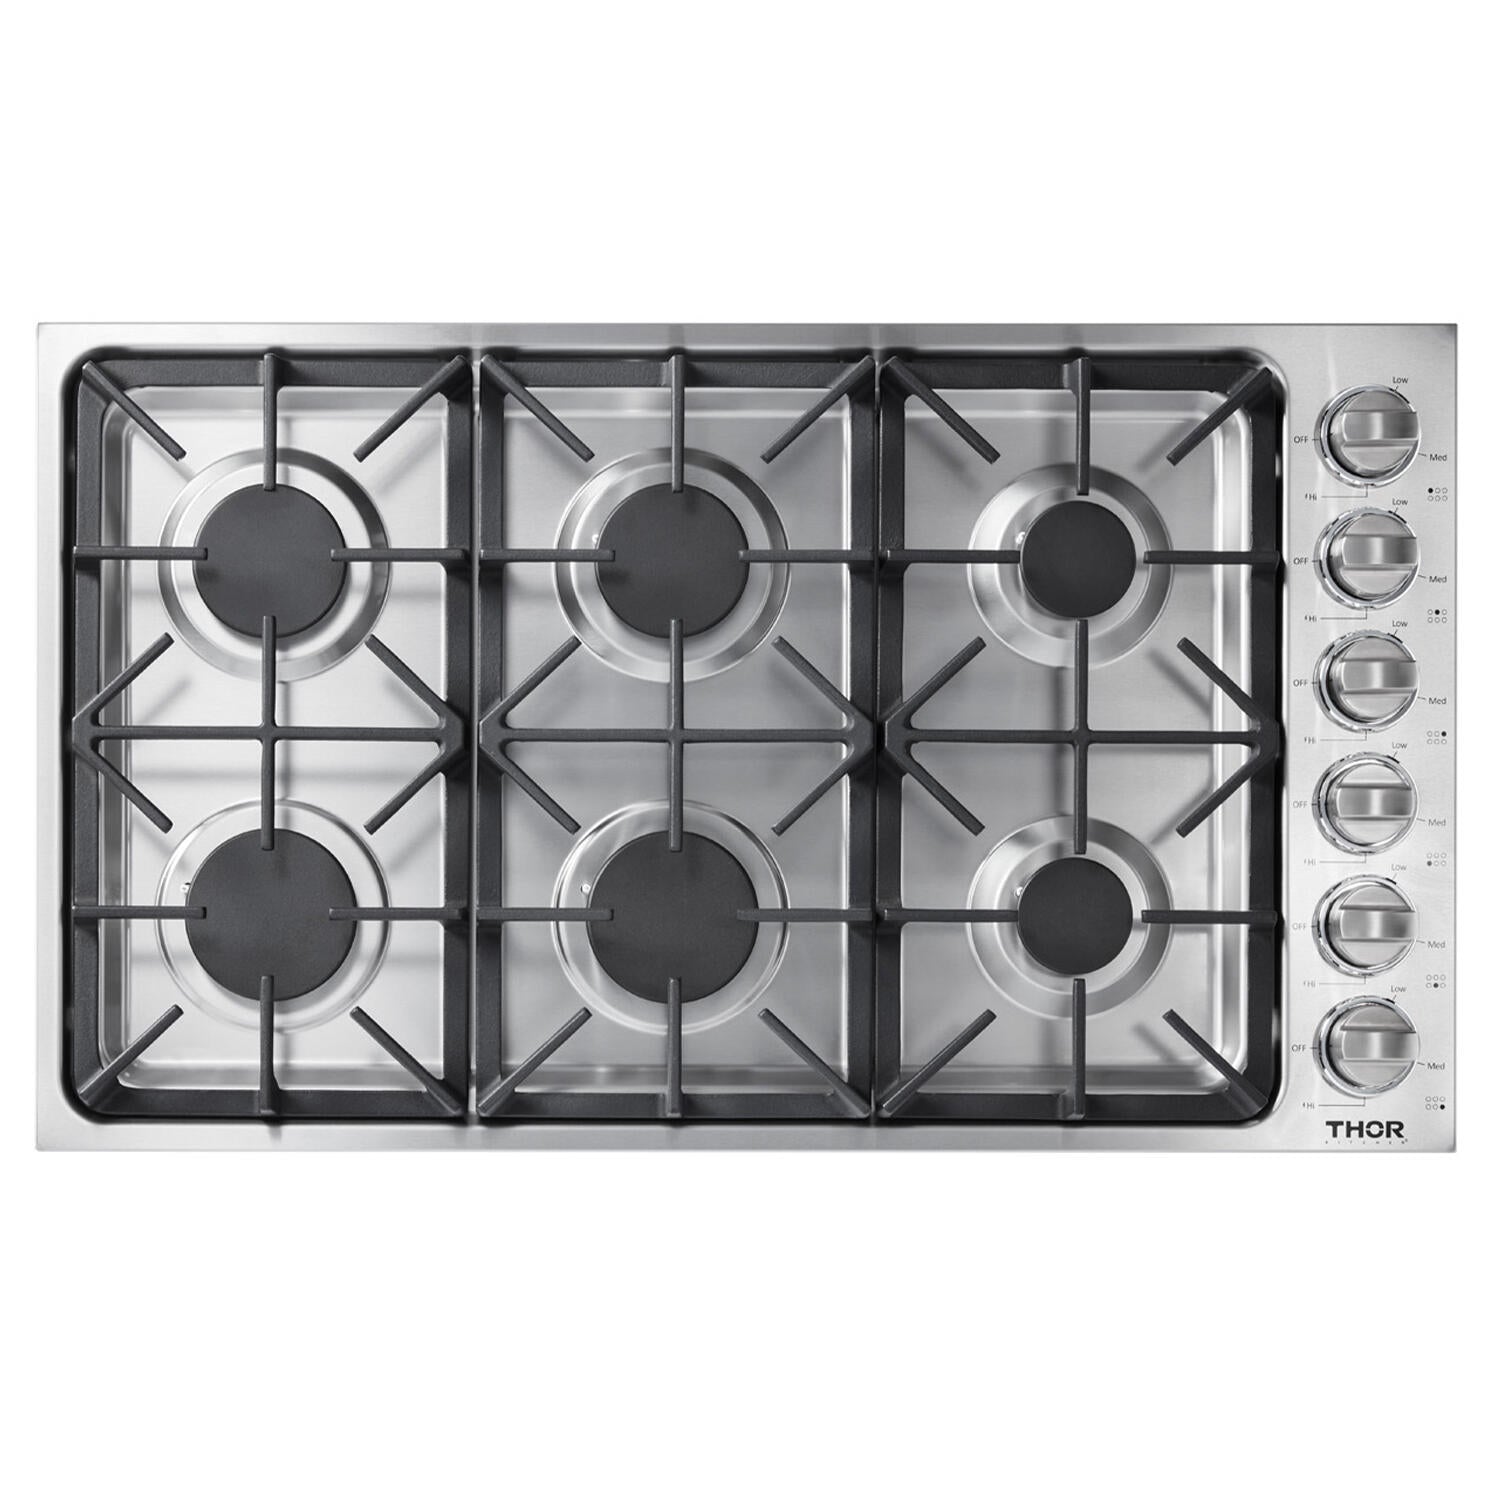 Miele 42 in. Electric Cooktop with 5 Smoothtop Burners - Black